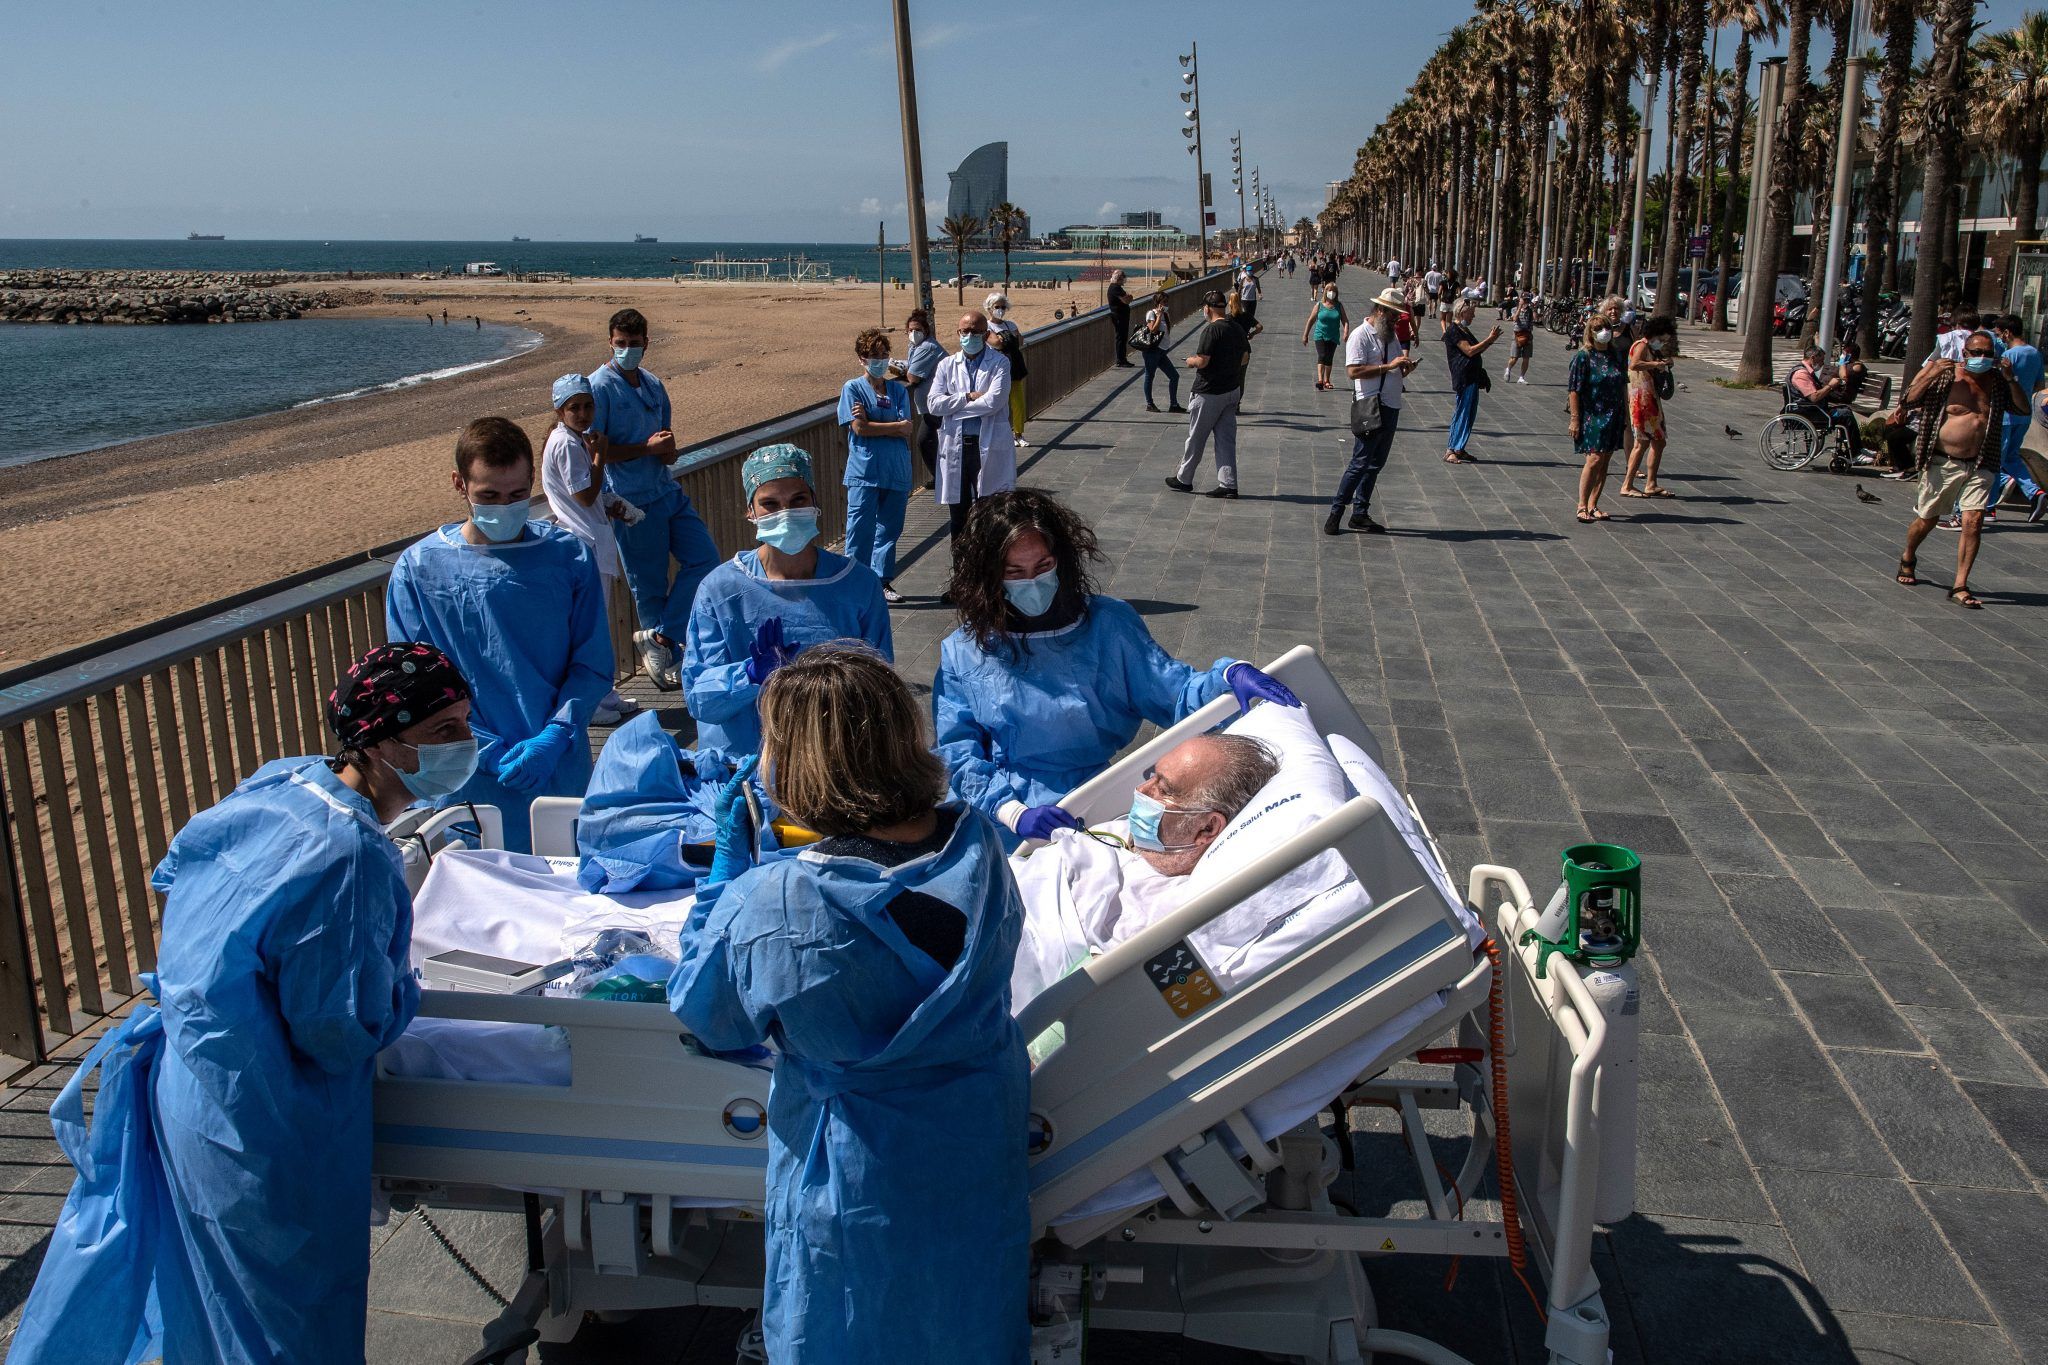 A patient recovering from coronavirus at Barcelona hospital is taken by doctors to the beach